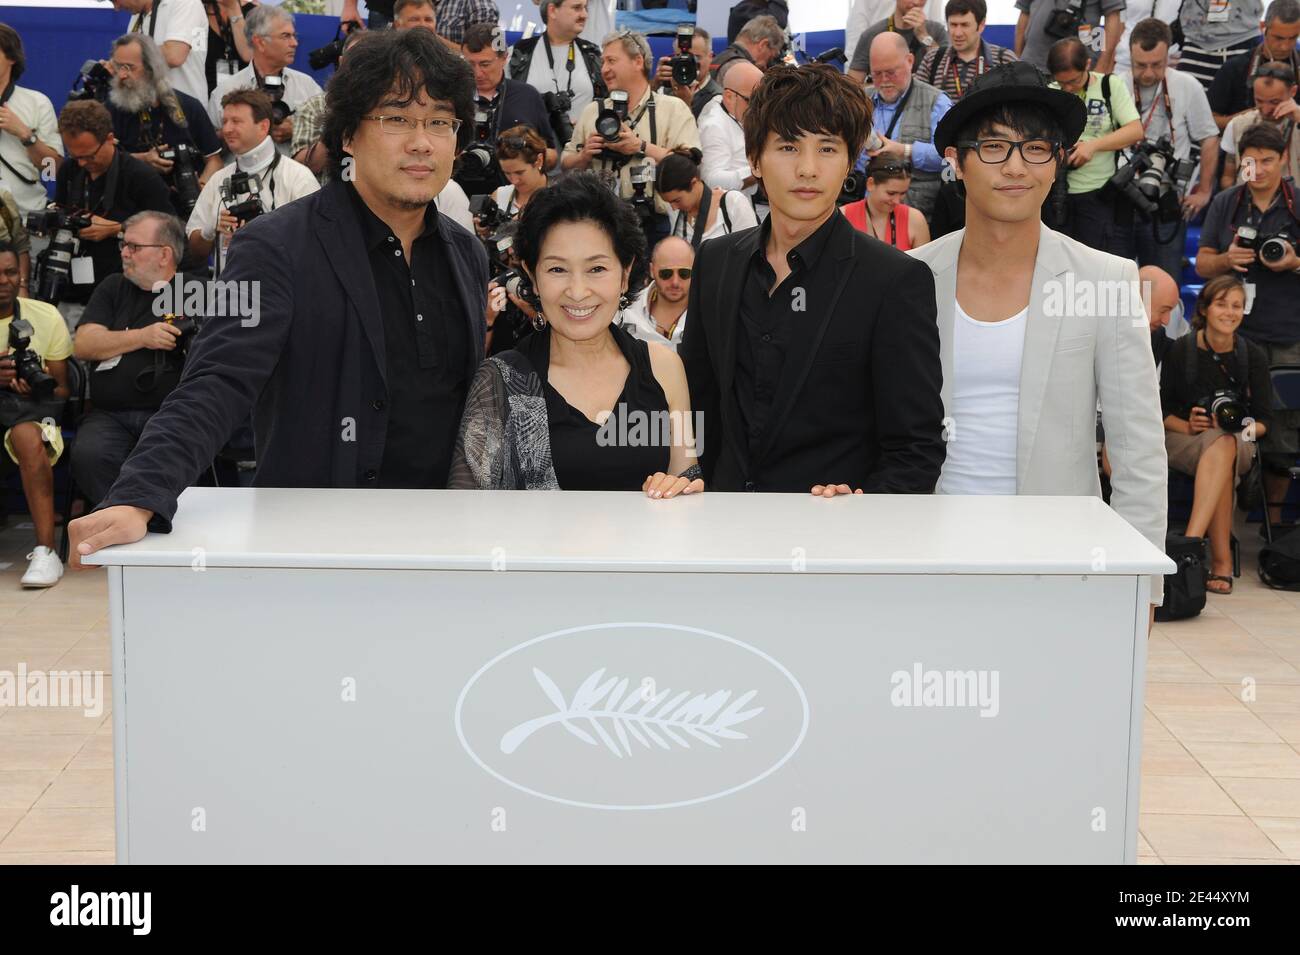 Director Bong Joon Ho, Actress Kim Hye-Ja, Actors Jin Goo and Won Bin attend the 'Mother' Photocall held at the Palais Des Festival during the 62nd International Cannes Film Festival in Cannes, France on May 16, 2009. Photo by Nebinger-Orban/ABACAPRESS.COM Stock Photo